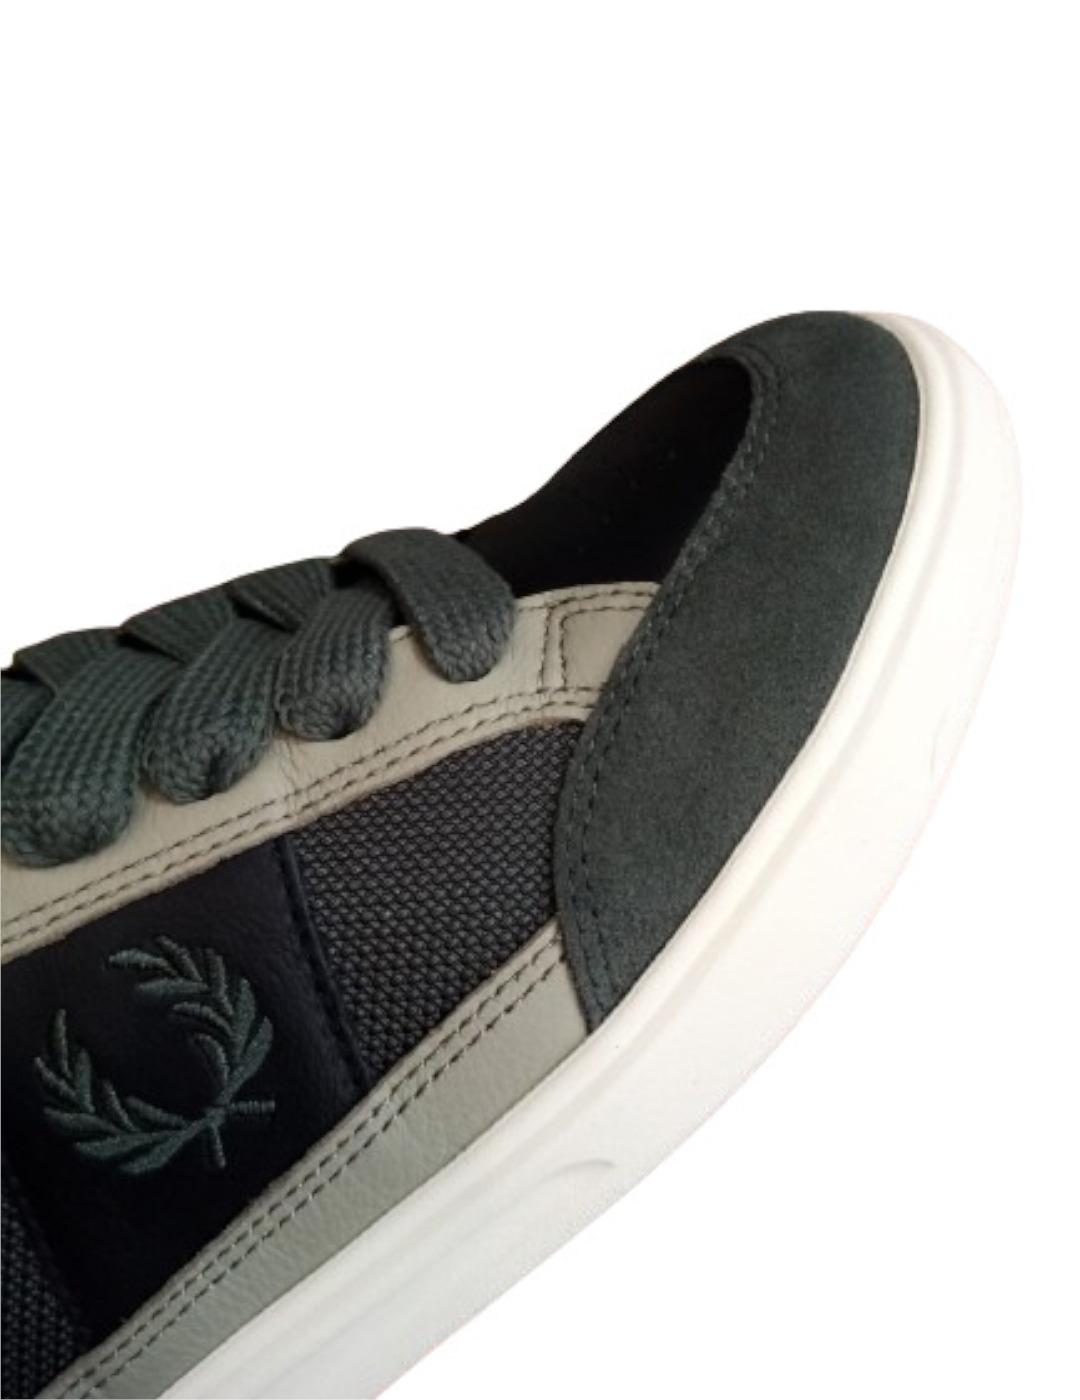 Deportiva Fred Perry B440 textured tela verde